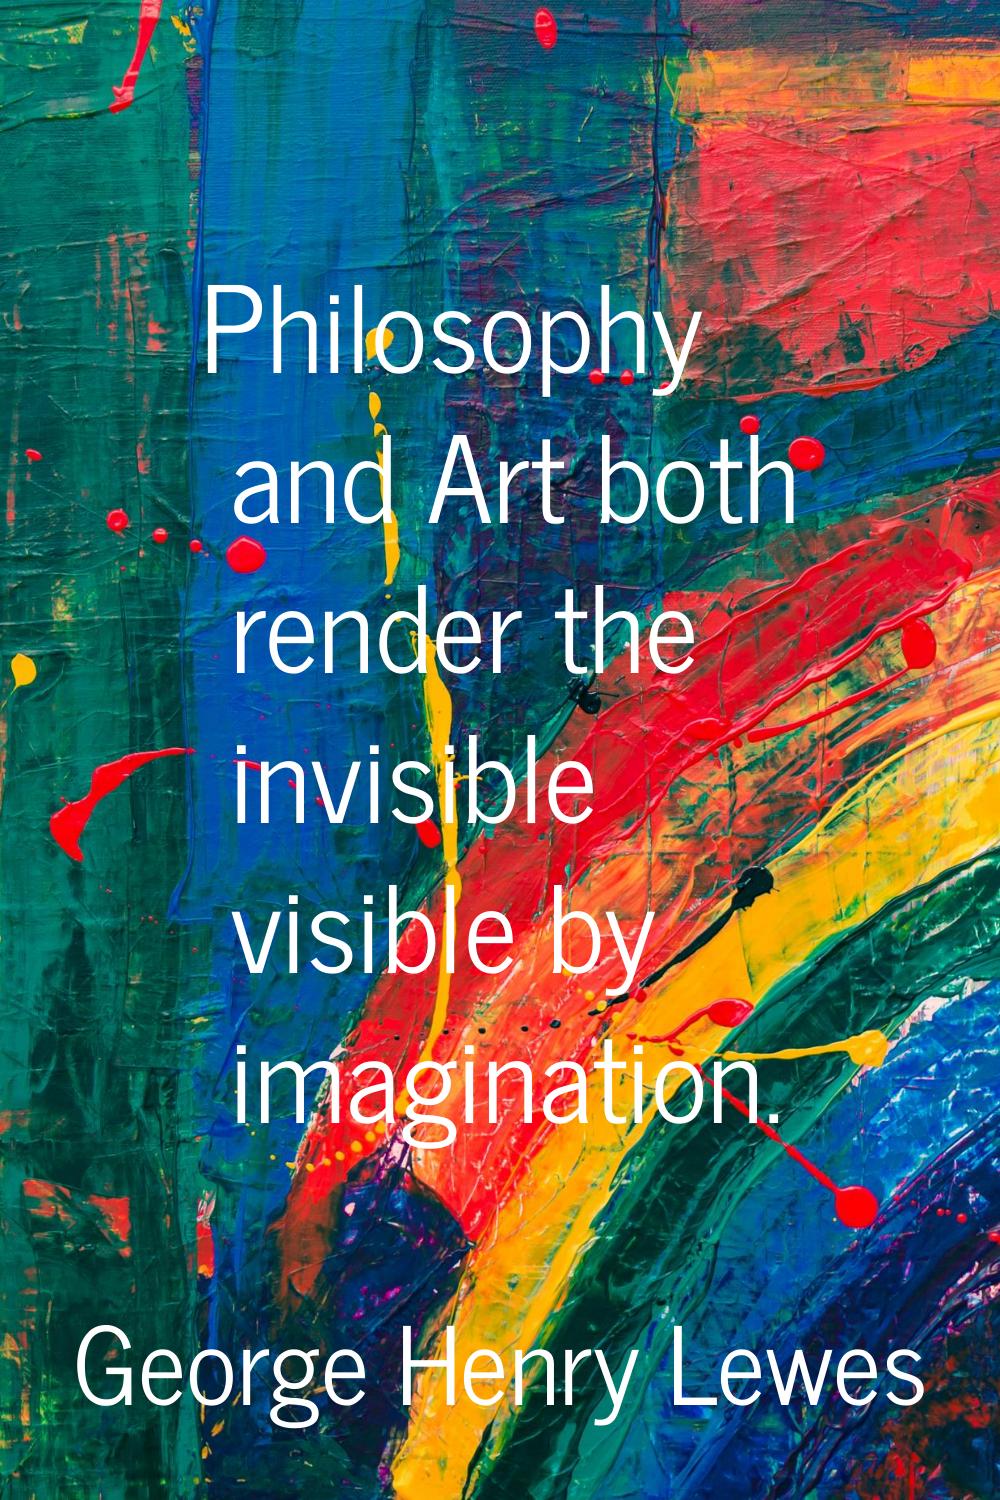 Philosophy and Art both render the invisible visible by imagination.